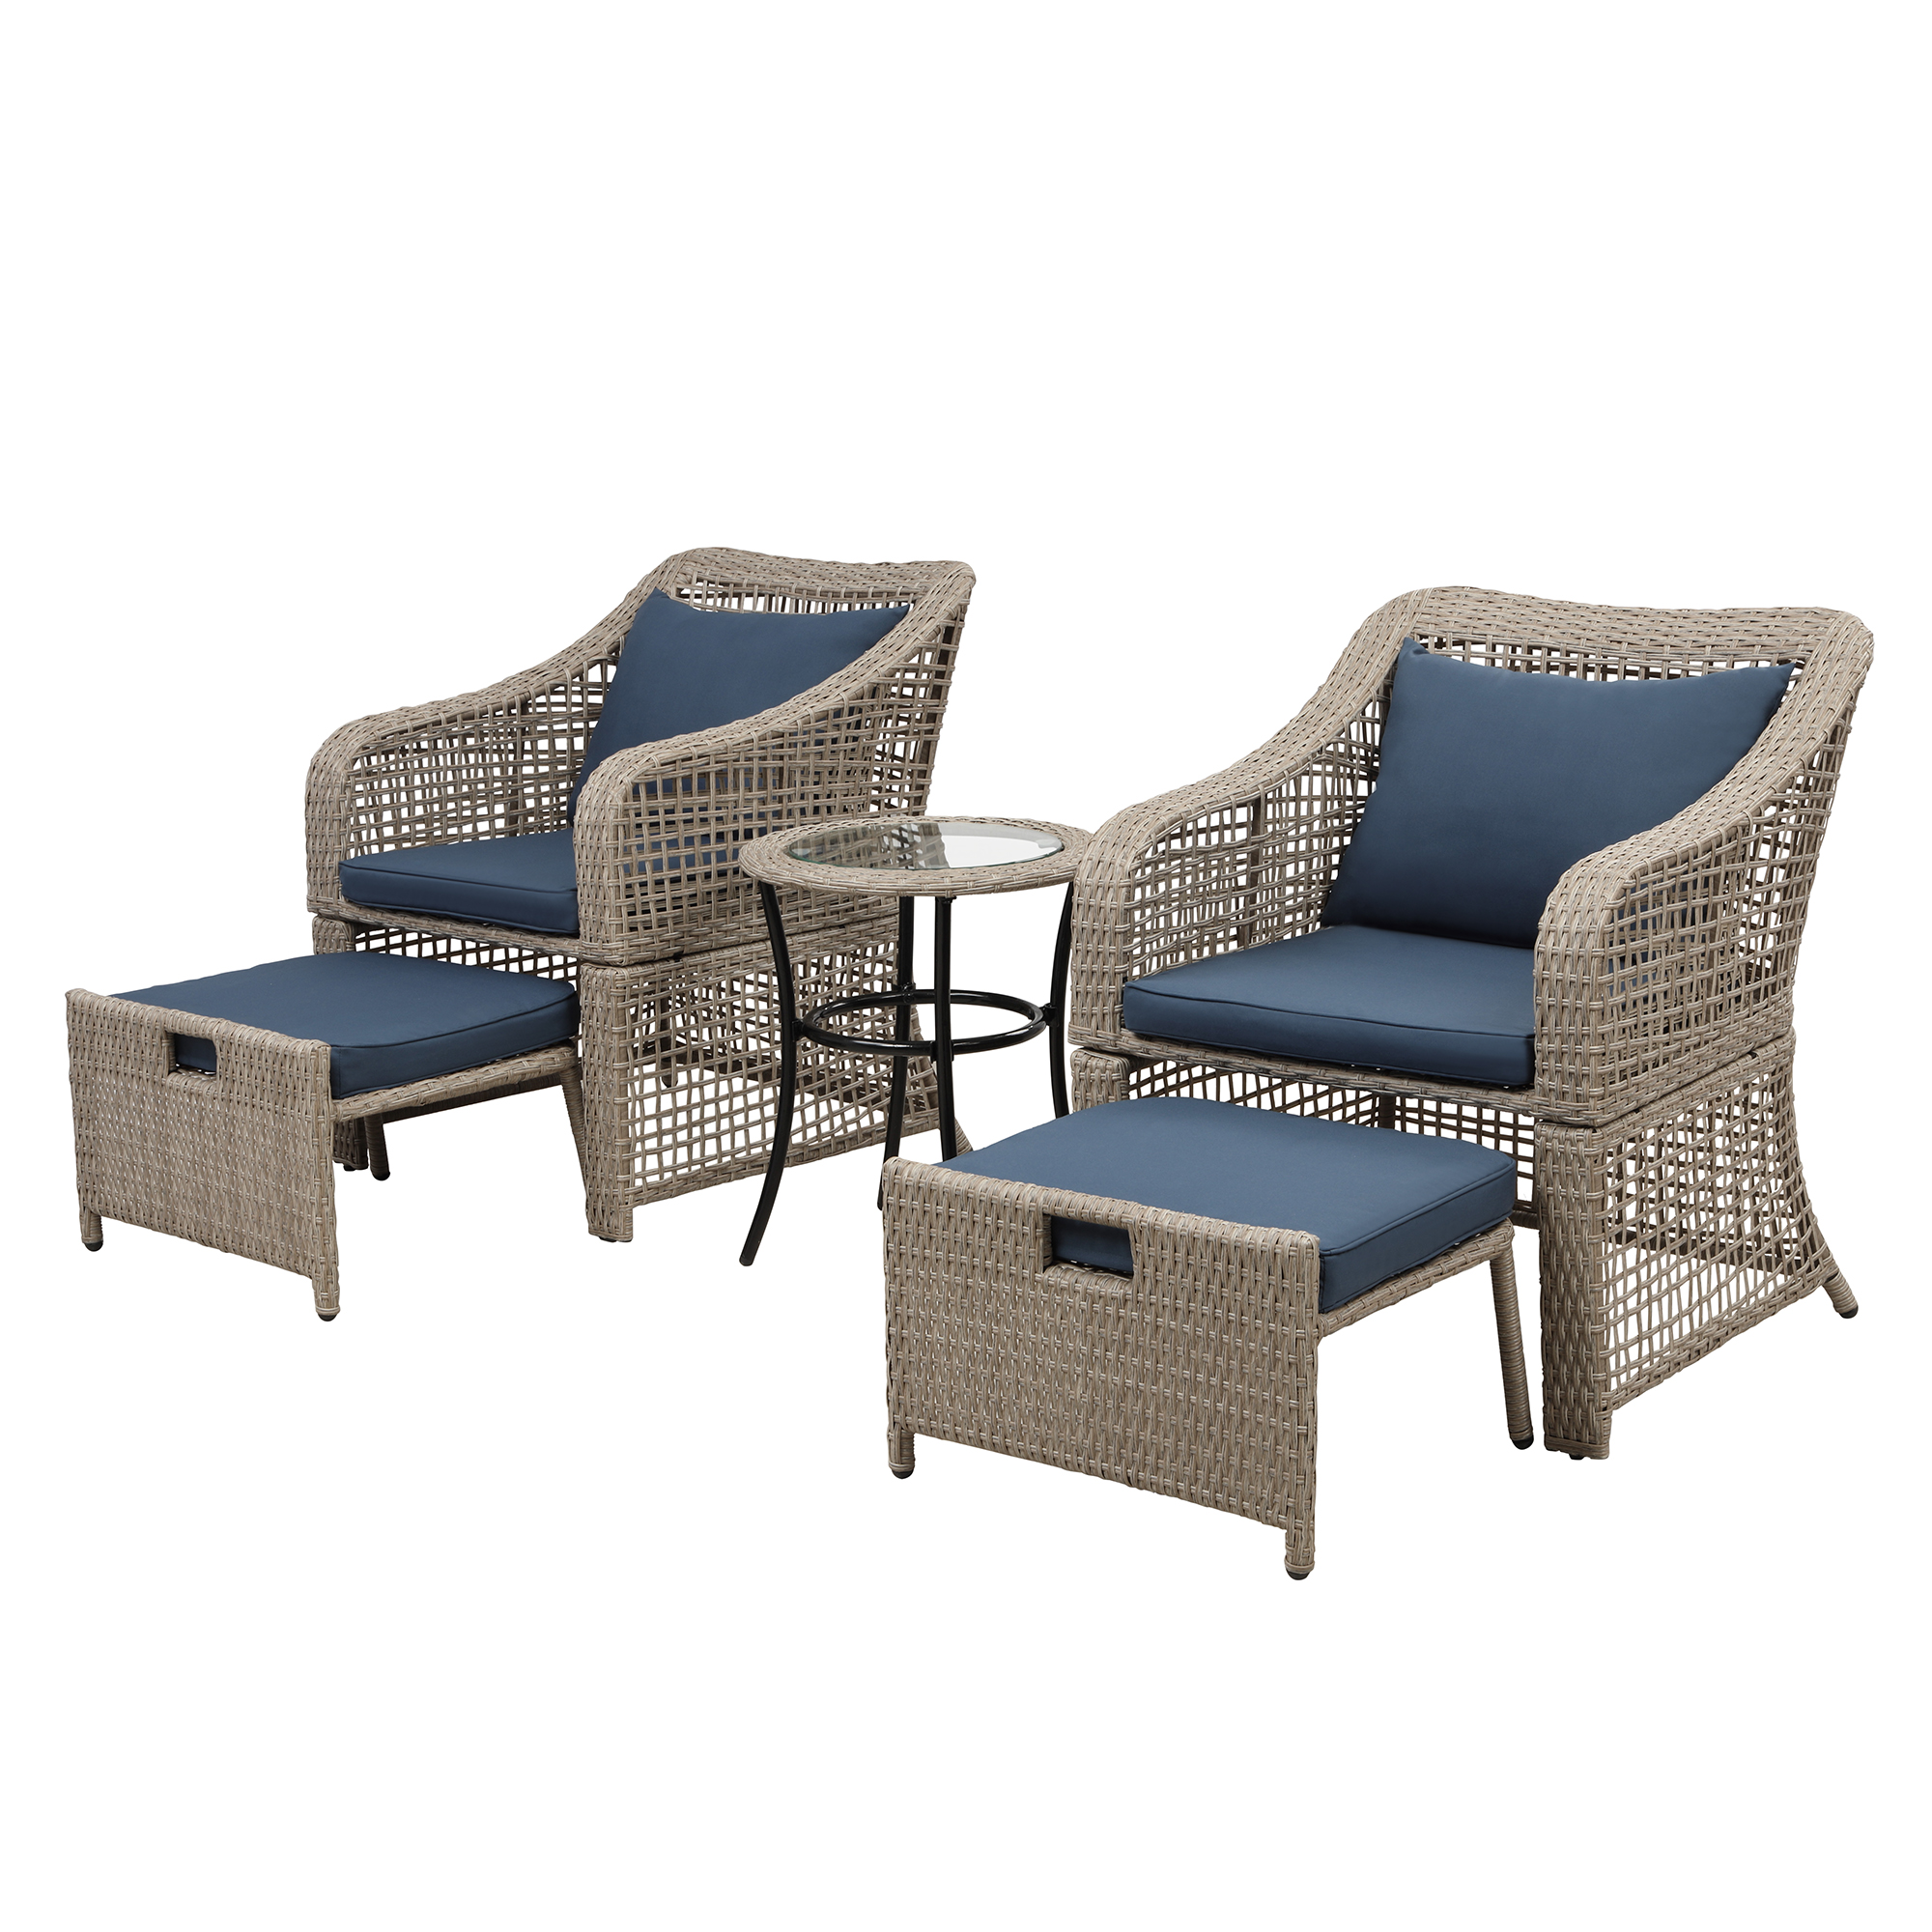 Patio Conversation Set, 5 Piece Outdoor Patio Furniture Sets with 2 Cushioned Chairs, 2 Ottoman, Glass Table, PE Wicker Rattan Outdoor Lounge Chair Chat Bistro Set for Backyard, Porch, Garden, LLL325 - image 3 of 9